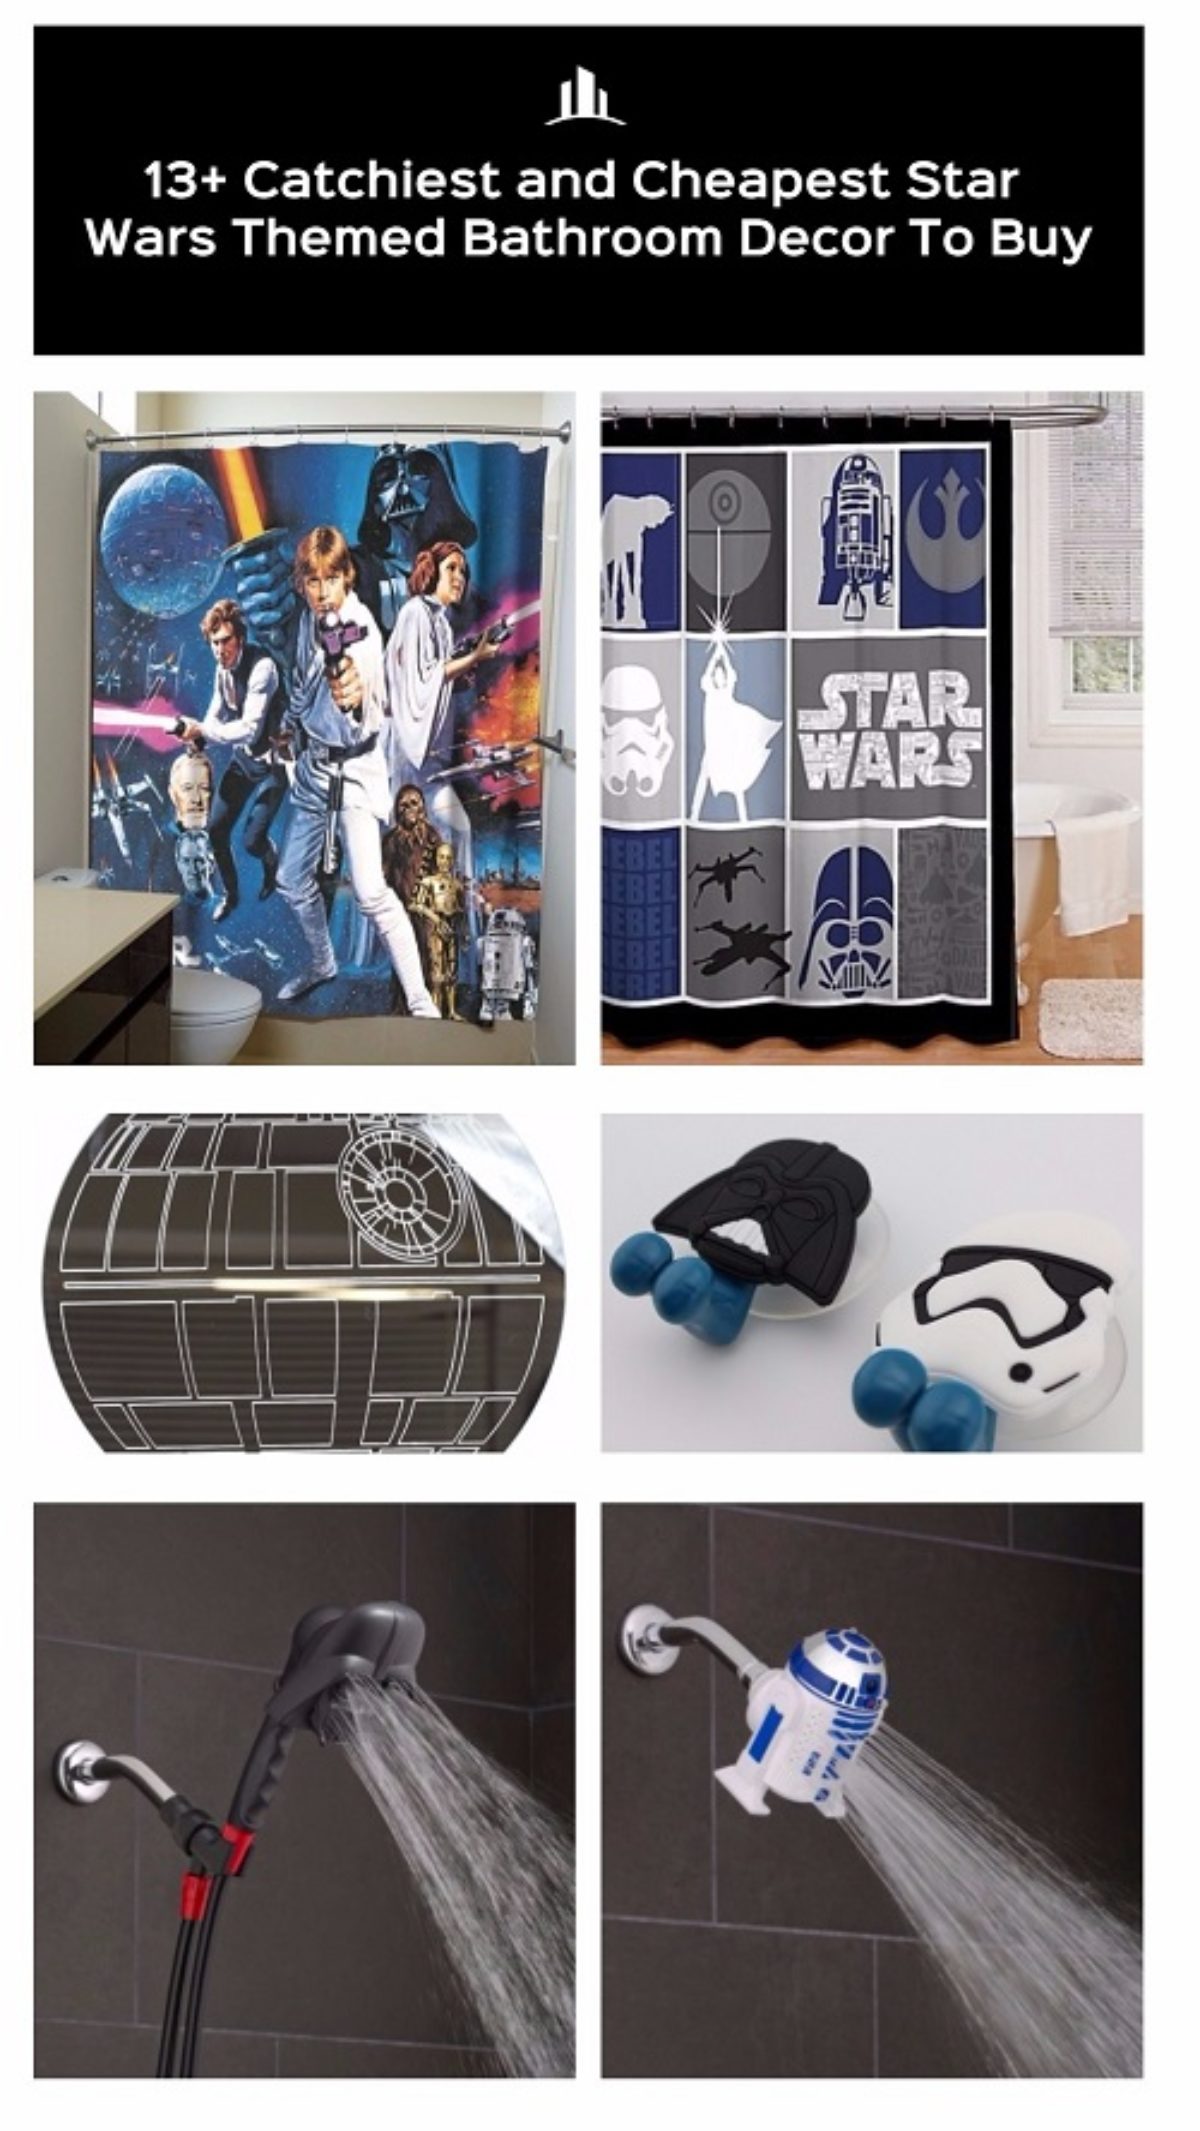 15 Catchiest And Cheapest Star Wars Themed Bathroom Decor To Buy